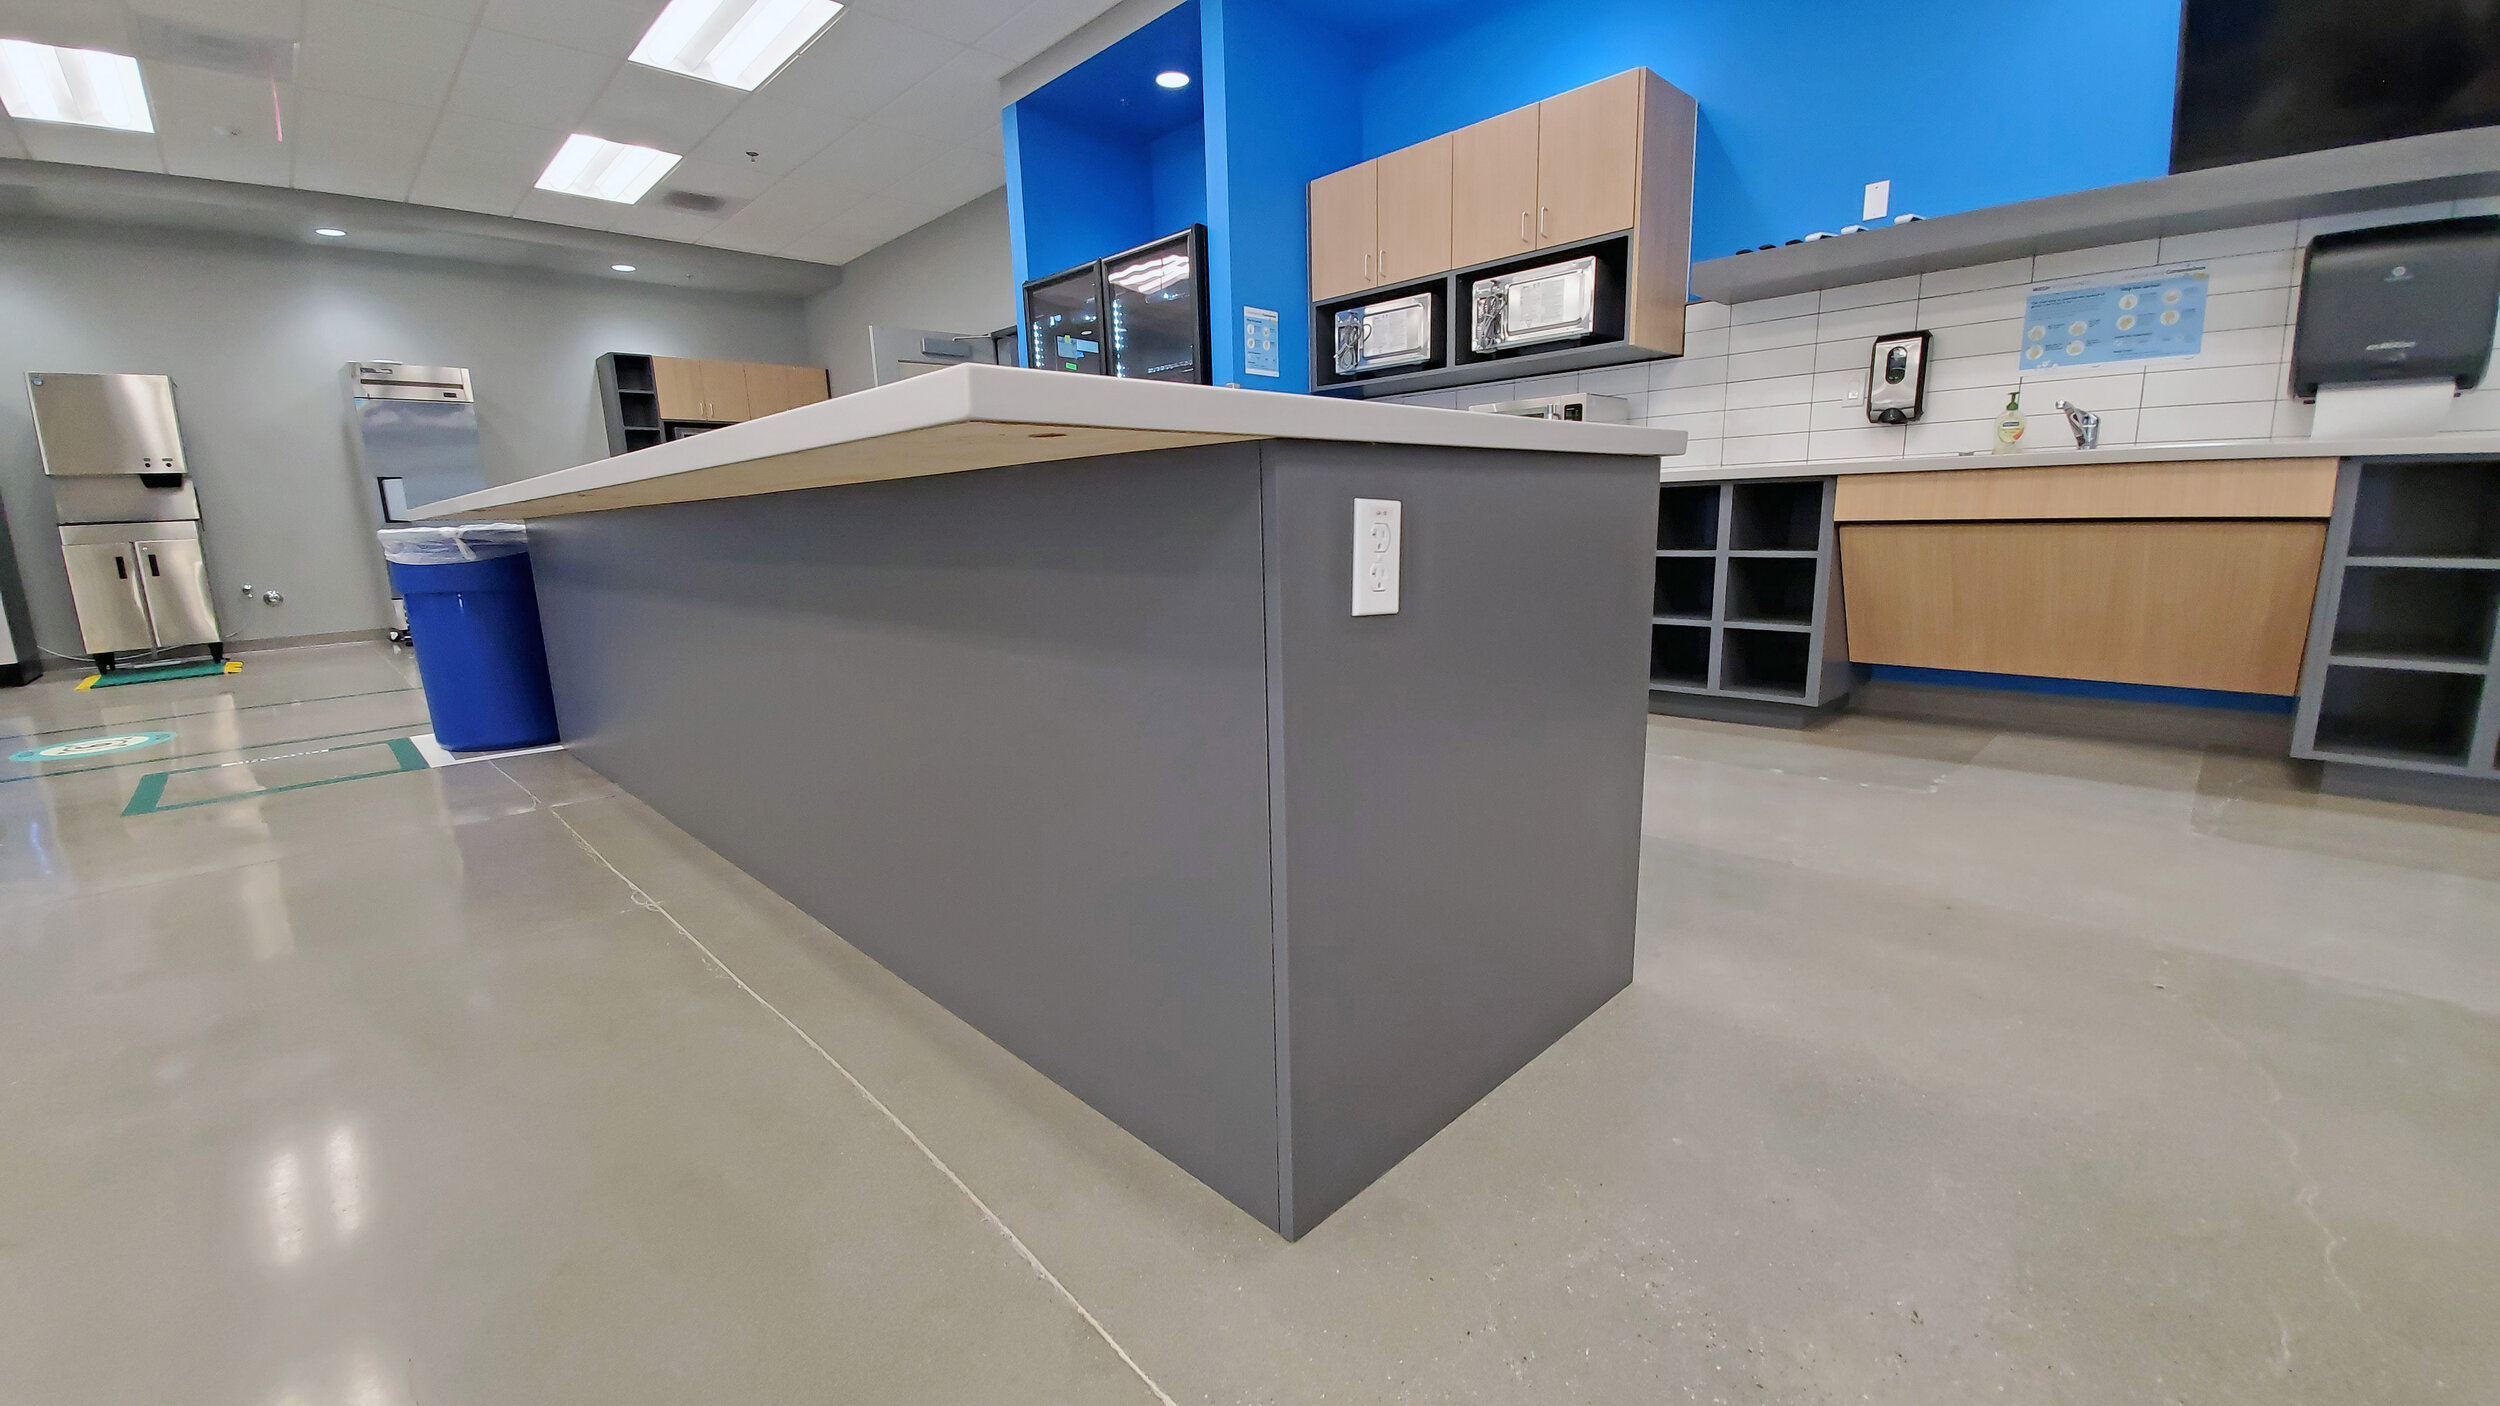 Precision_Custom_Cabinets_San_Diego_Commercial_Cabinetry_Amazon_Warehouse_Breakroom 25.jpg